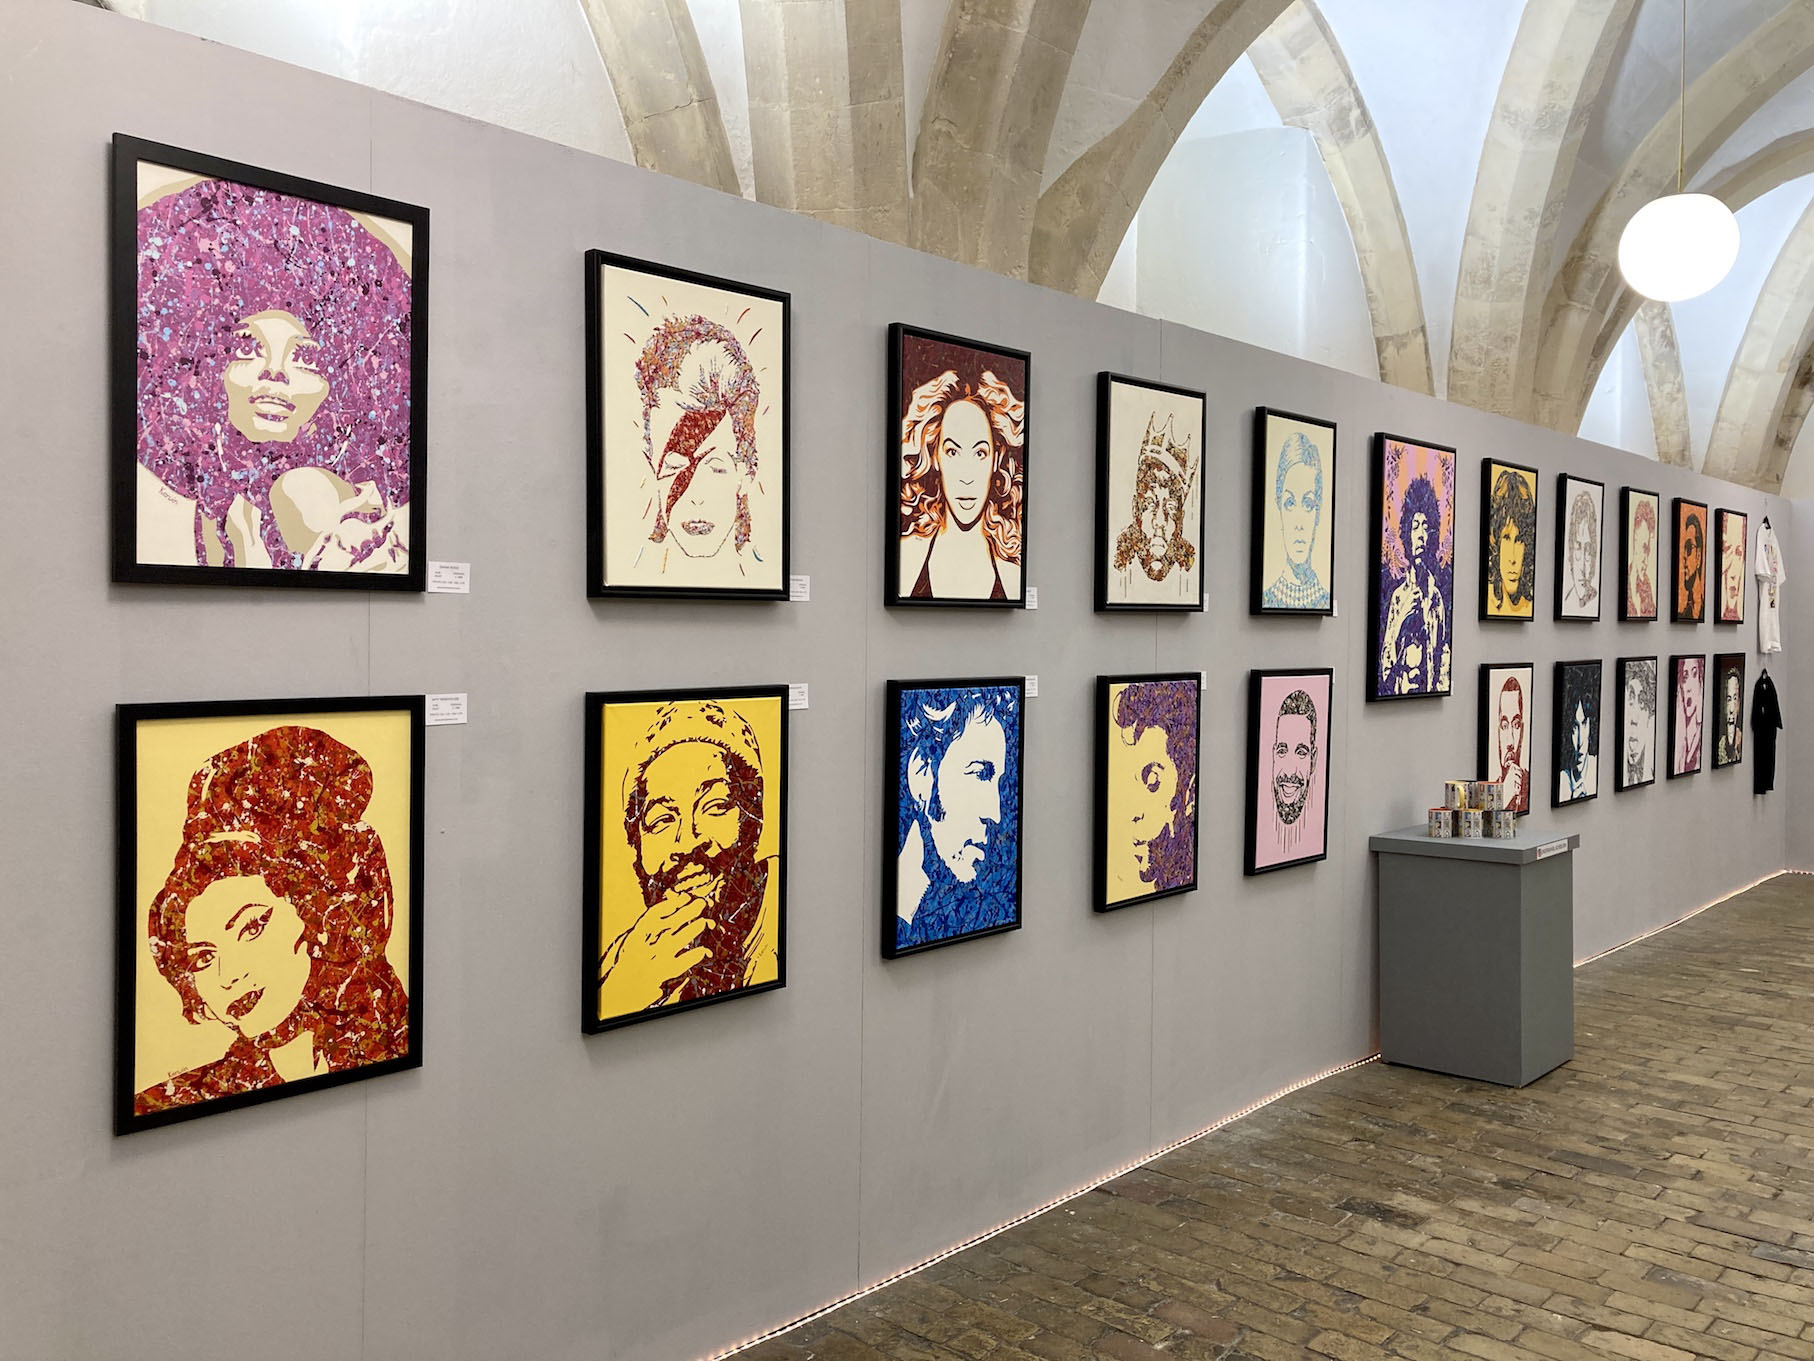 Kerwin Blackburn exhibiting his Jackson Pollock-inspired pop art music paintings at the Crypt Gallery at Norwich School in Norfolk, February-March 2022 | By Kerwin | Diana Ross | Amy Winehouse | Marvin Gaye prints